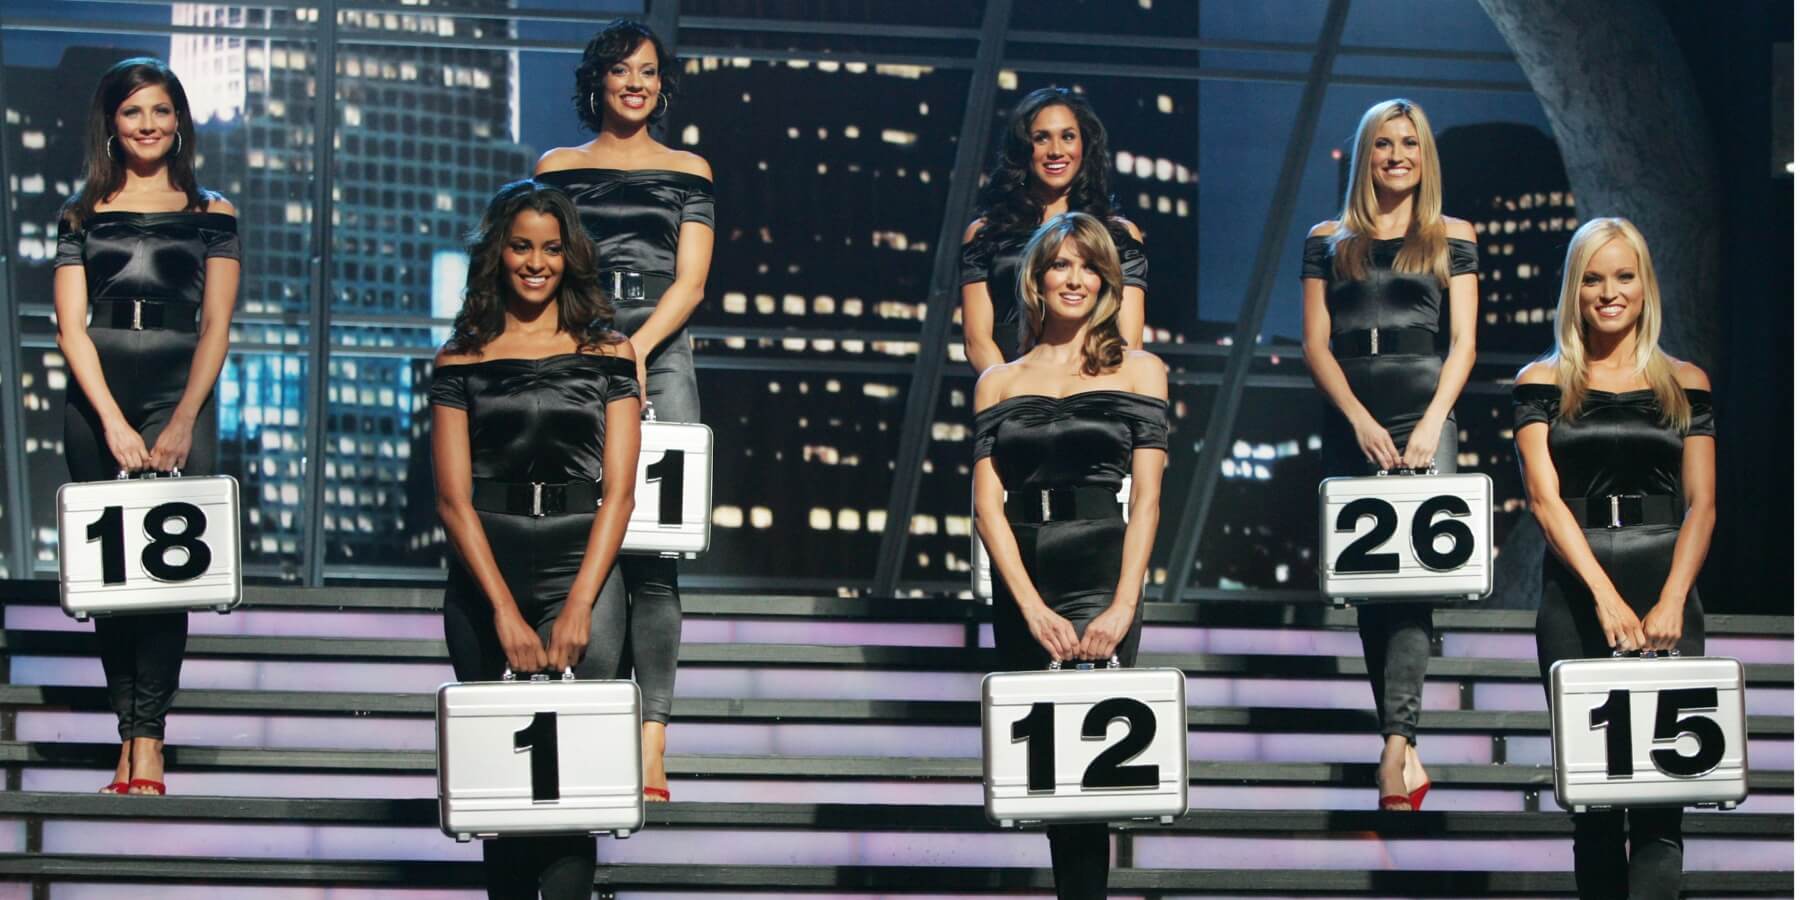 Claudia Jordan (1st row left) and Meghan Markle (3rd from left) appeared together on Season 2 of 'Deal or No Deal'